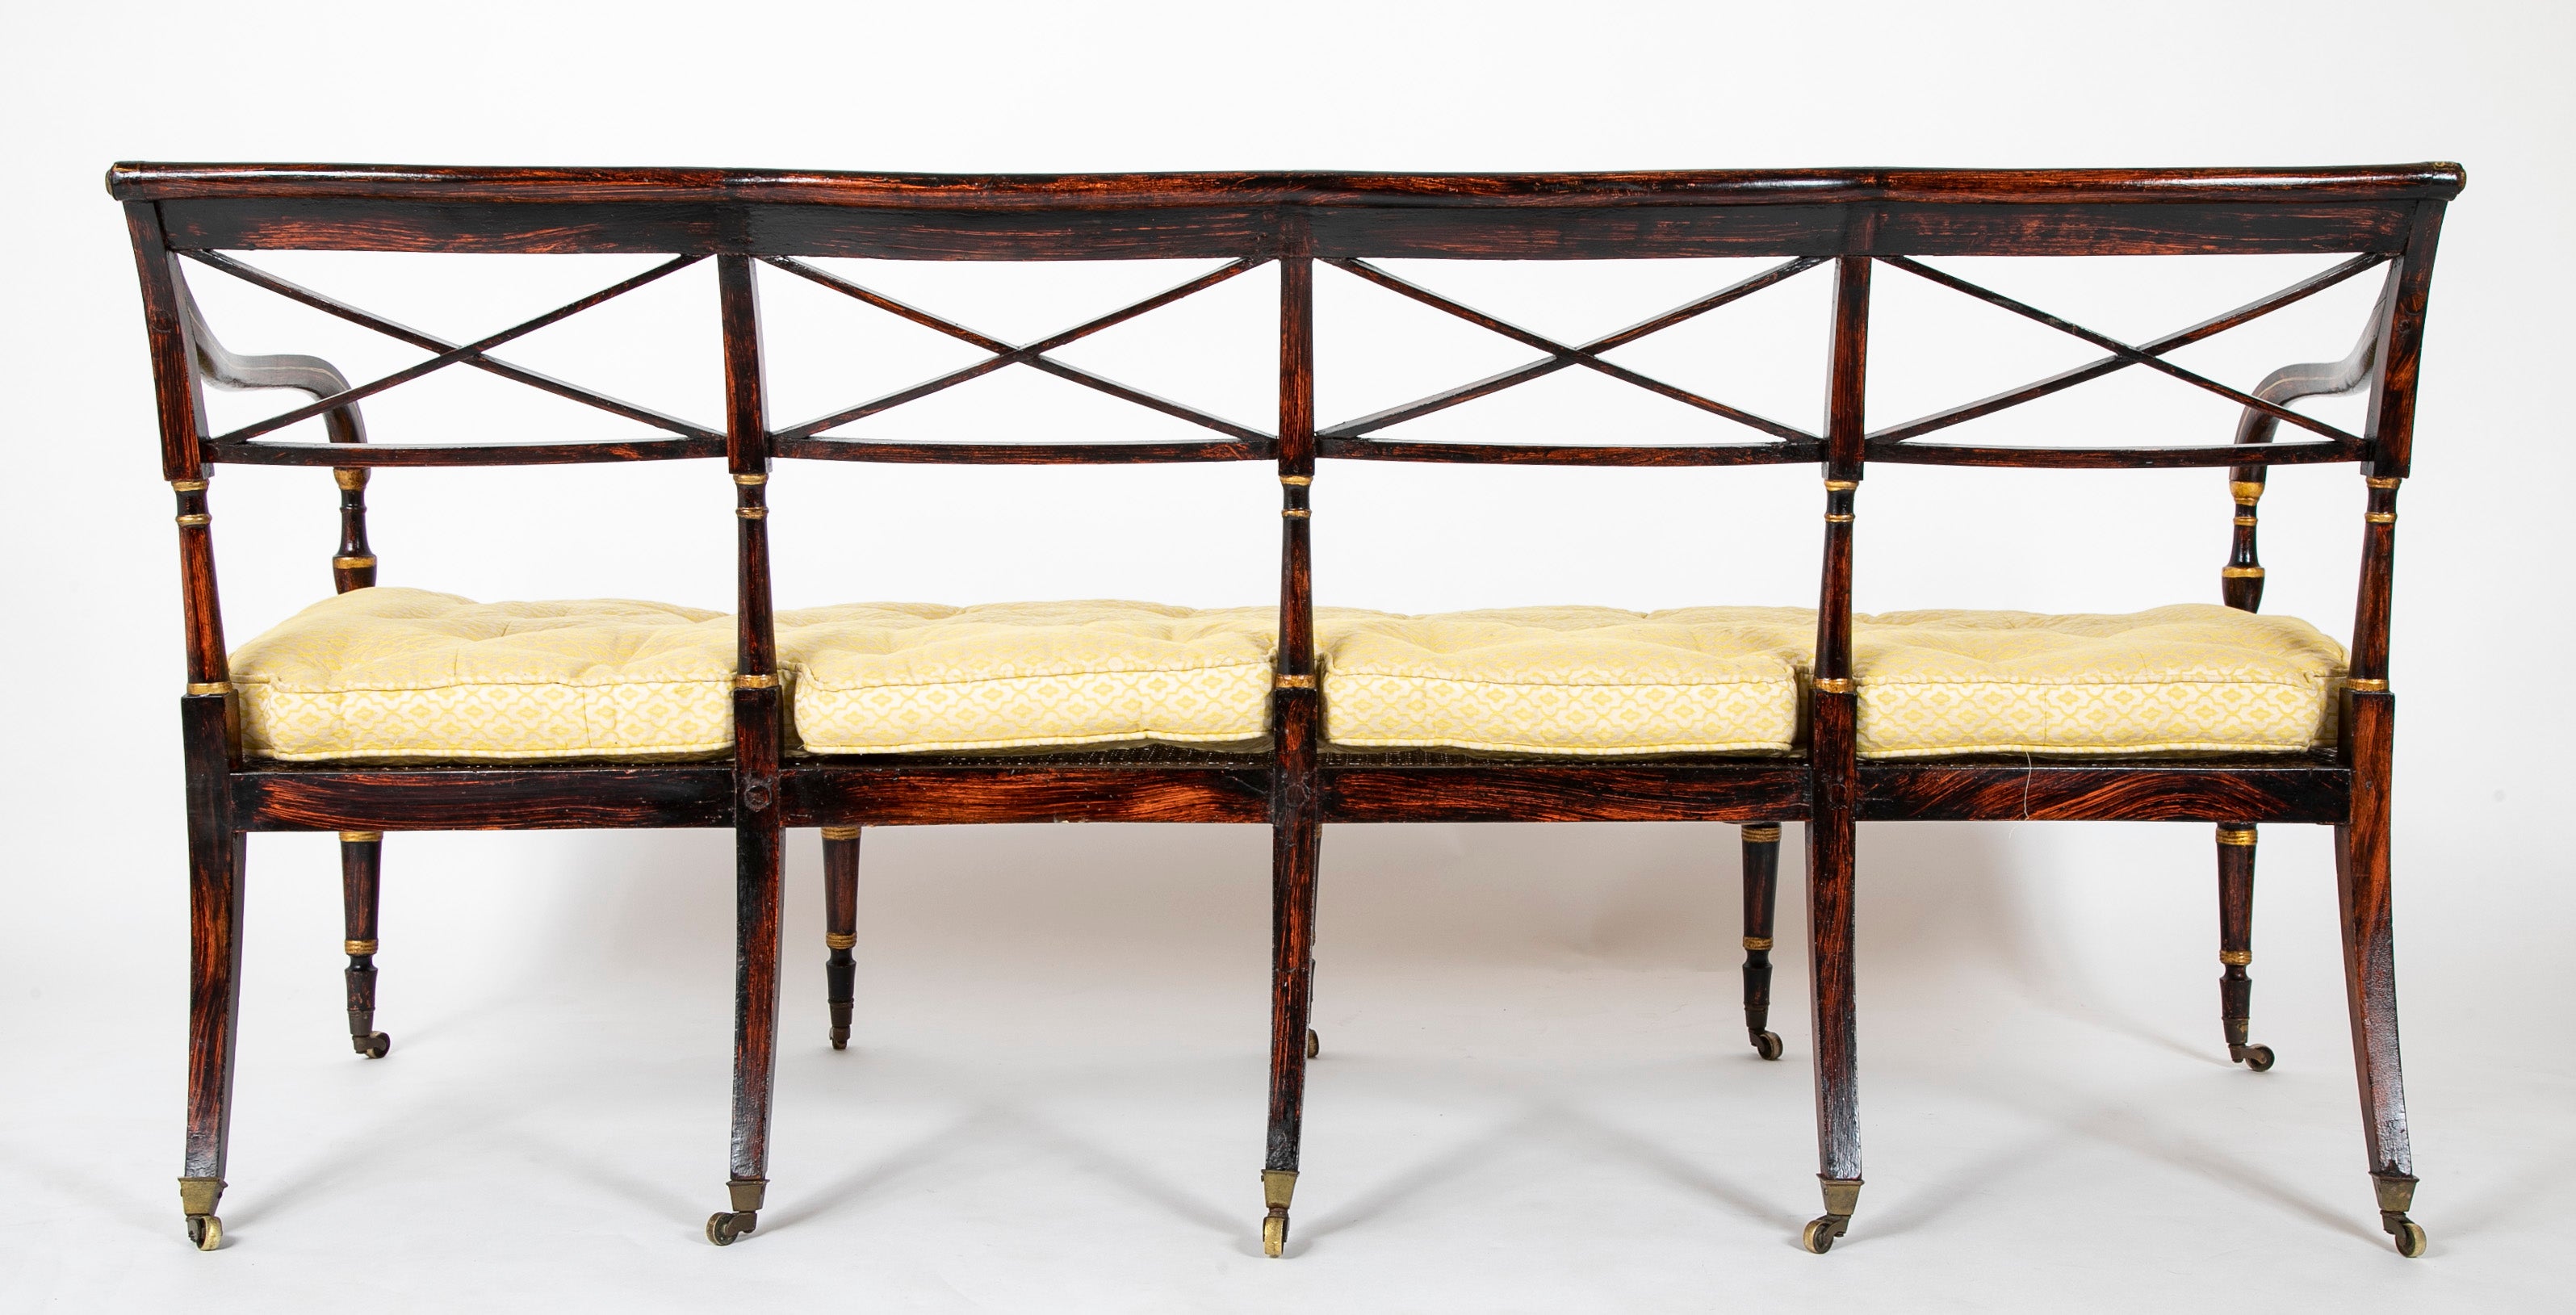 19th Century English Faux Bois Painted Bench with Caned Seat